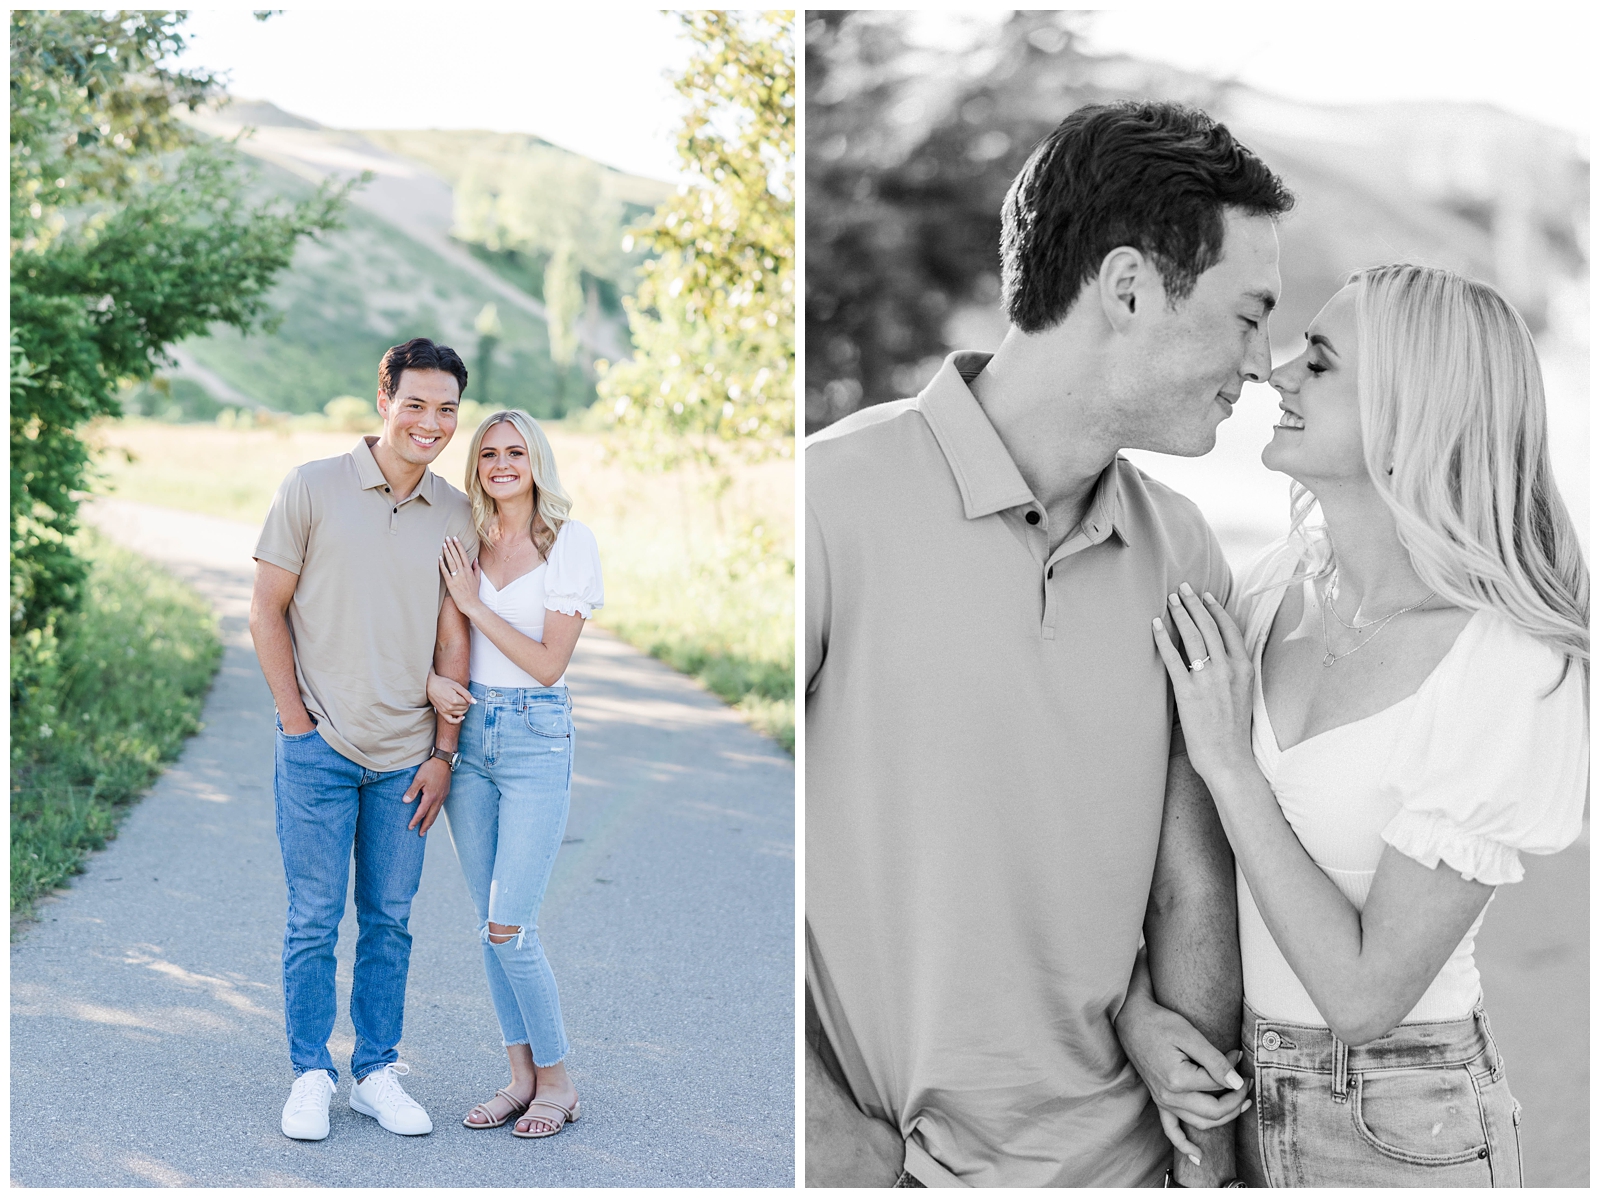 Summer engagement photo outfit inspiration